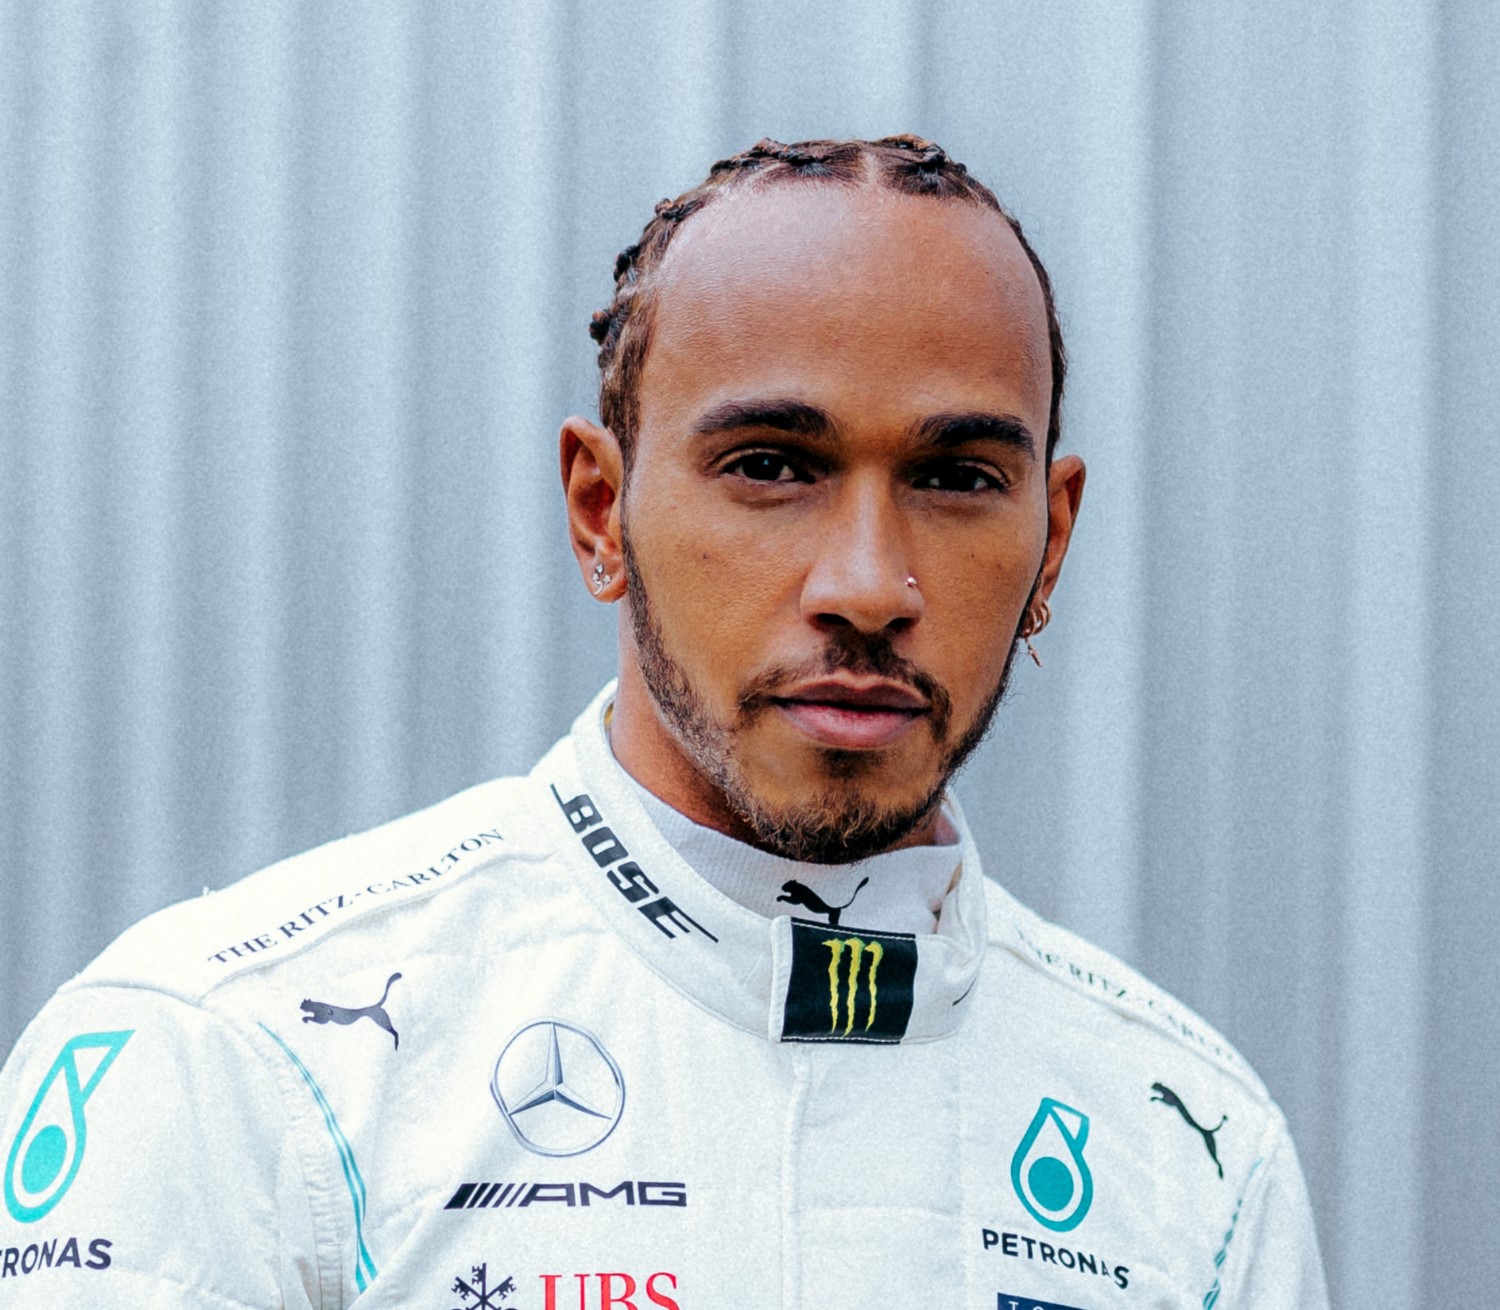 Hamilton might be involved with Formula E someday, but not as a driver